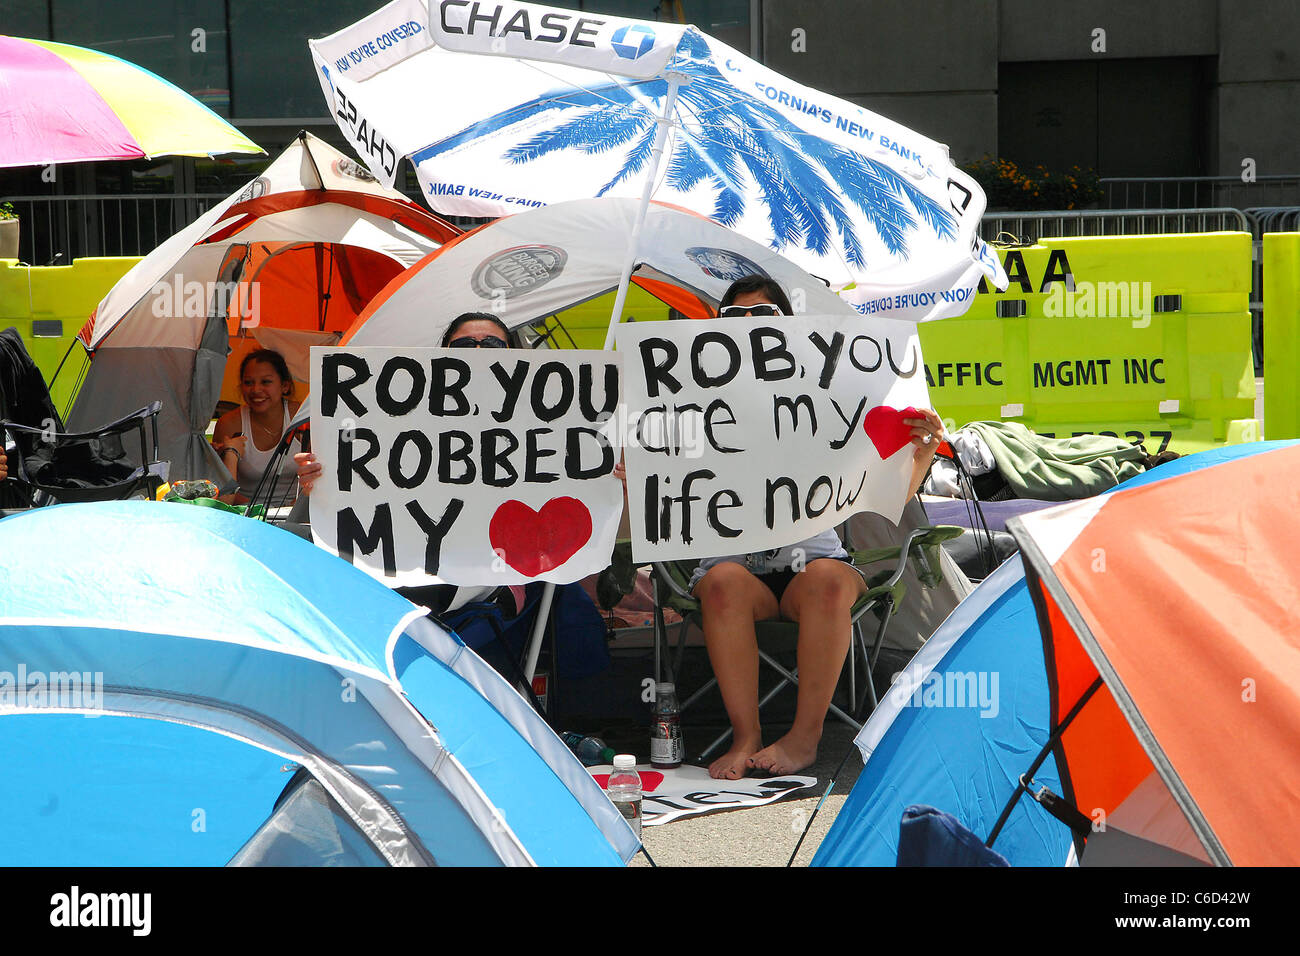 TWILIGHT FANS START CAMPING FOR LOS ANGELES PREMIERE Die-hard TWILIGHT fans have turned the Nokia Plaza L.A. Live in Los Stock Photo